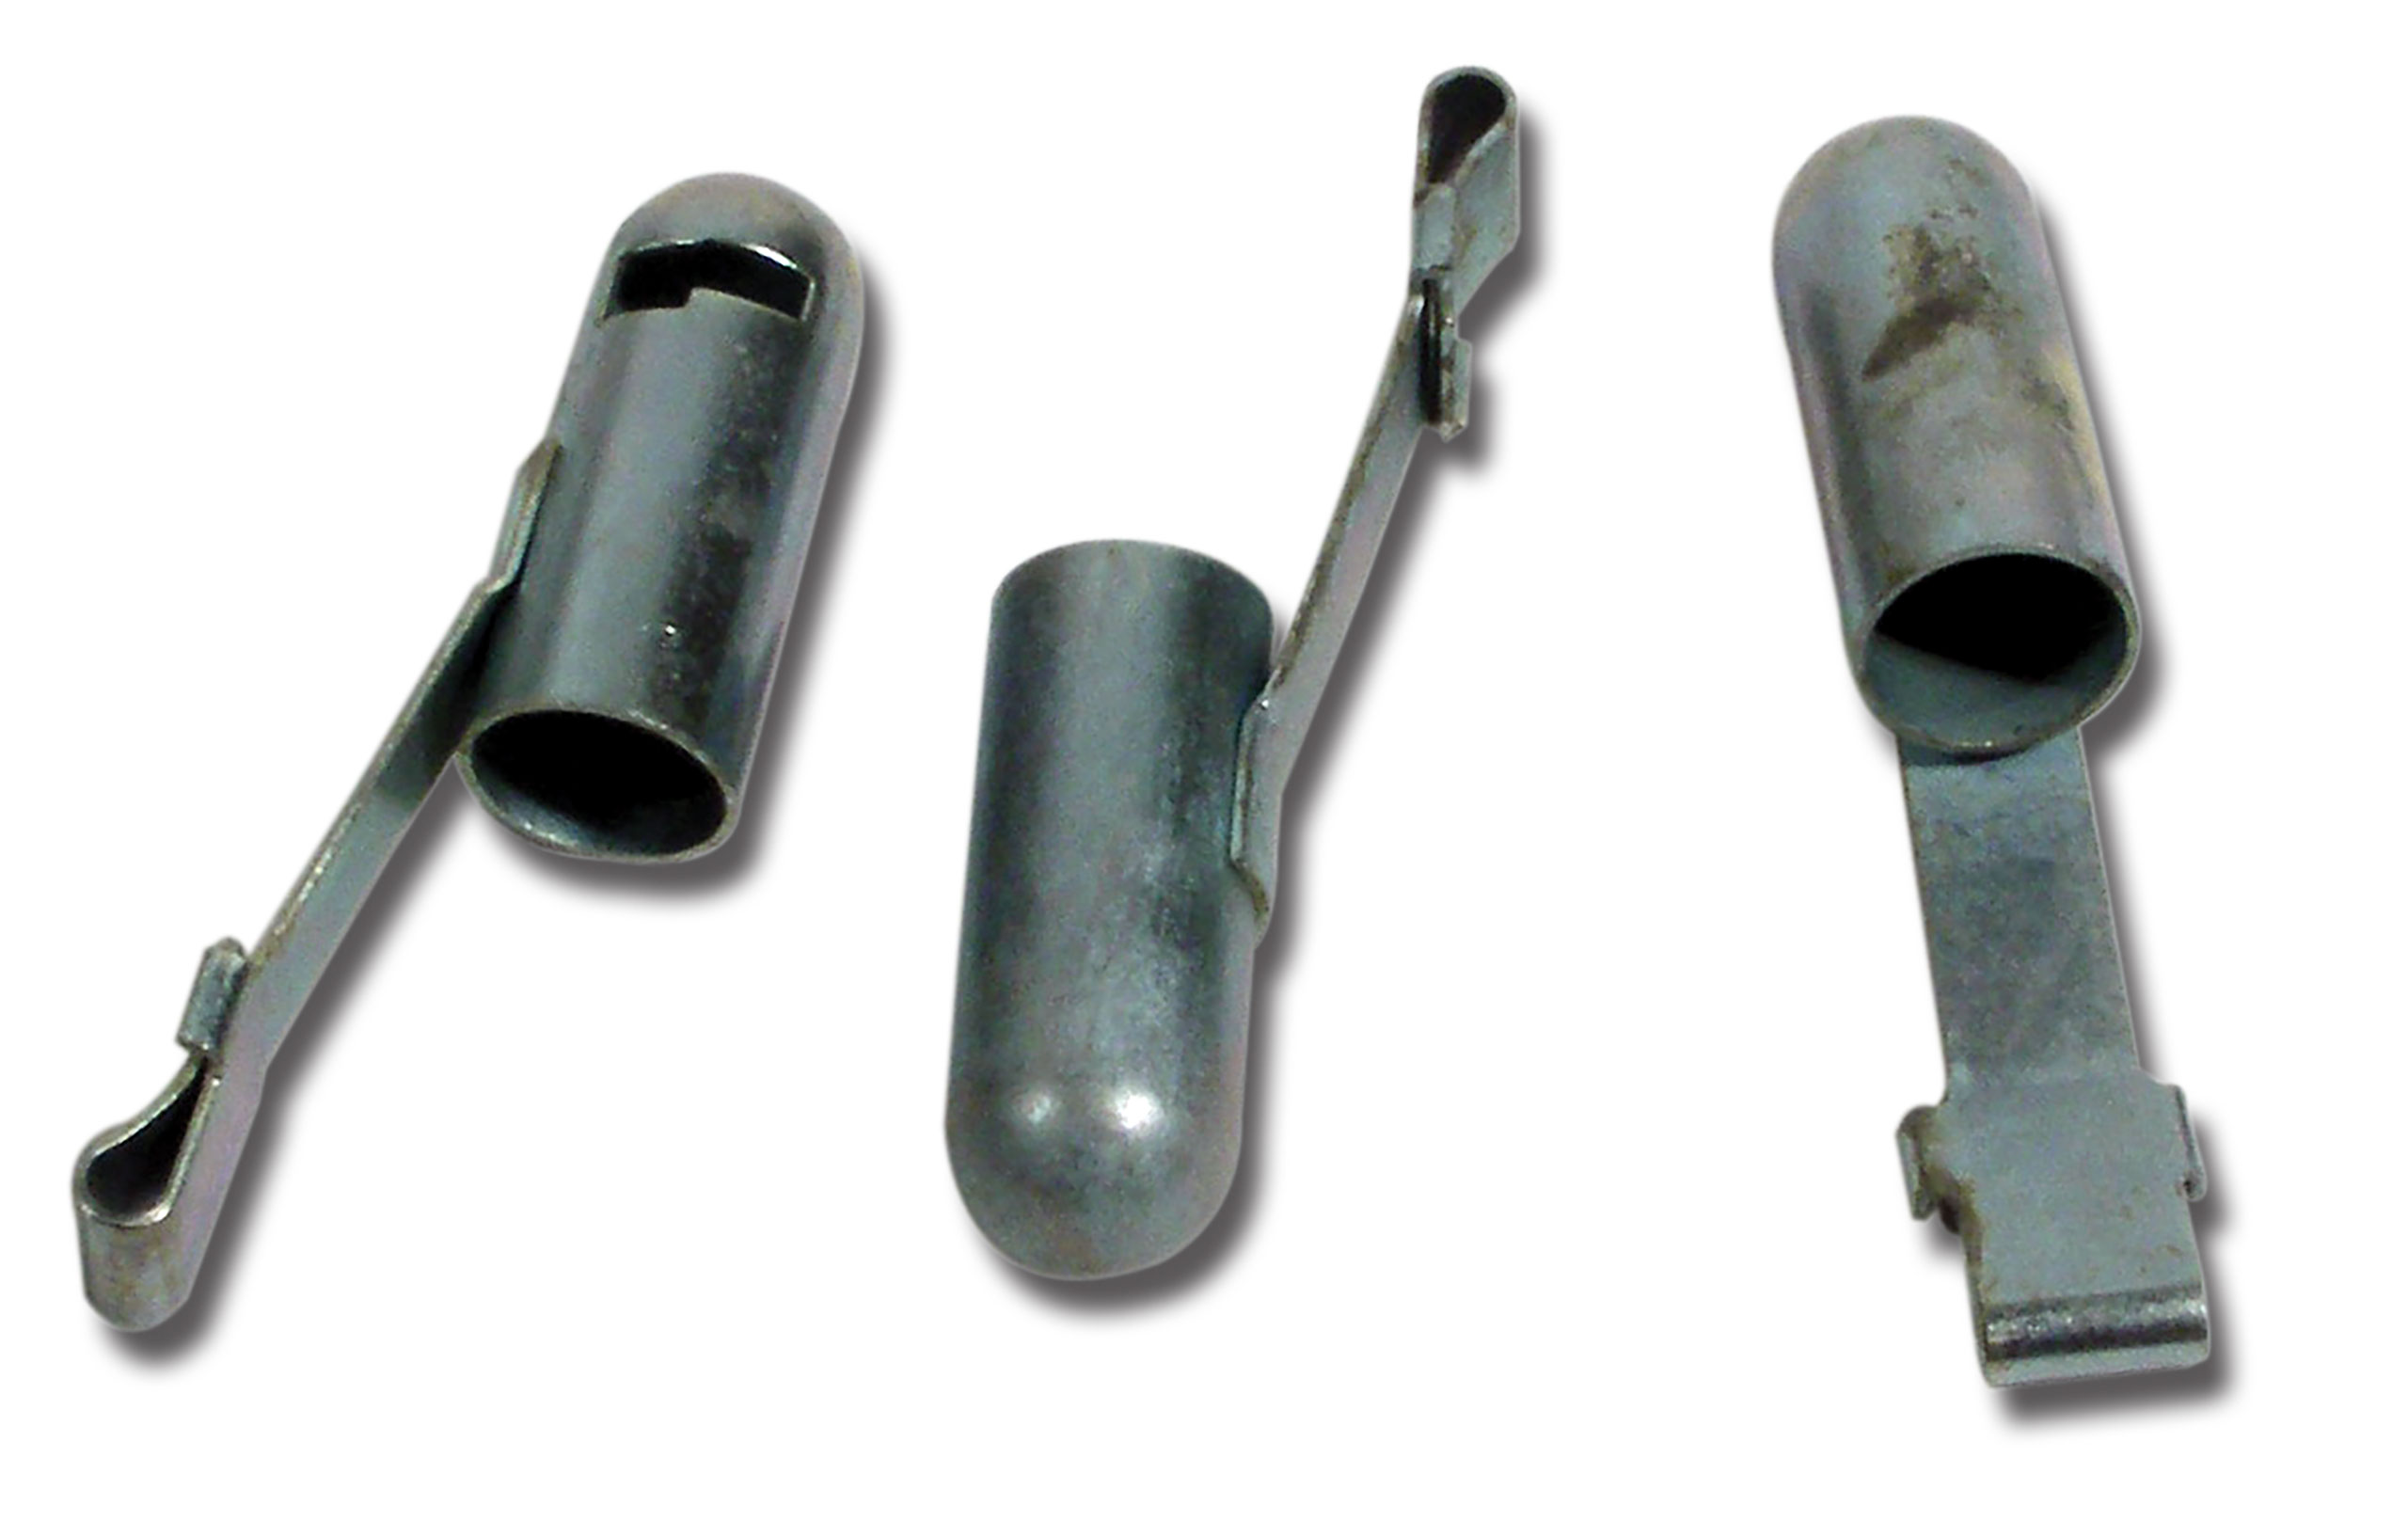 C2 1963-1967 Chevrolet Corvette Air Conditioning Indicator Bulb Metal Sockets & Shades. 3 Piece - Auto Accessories of America